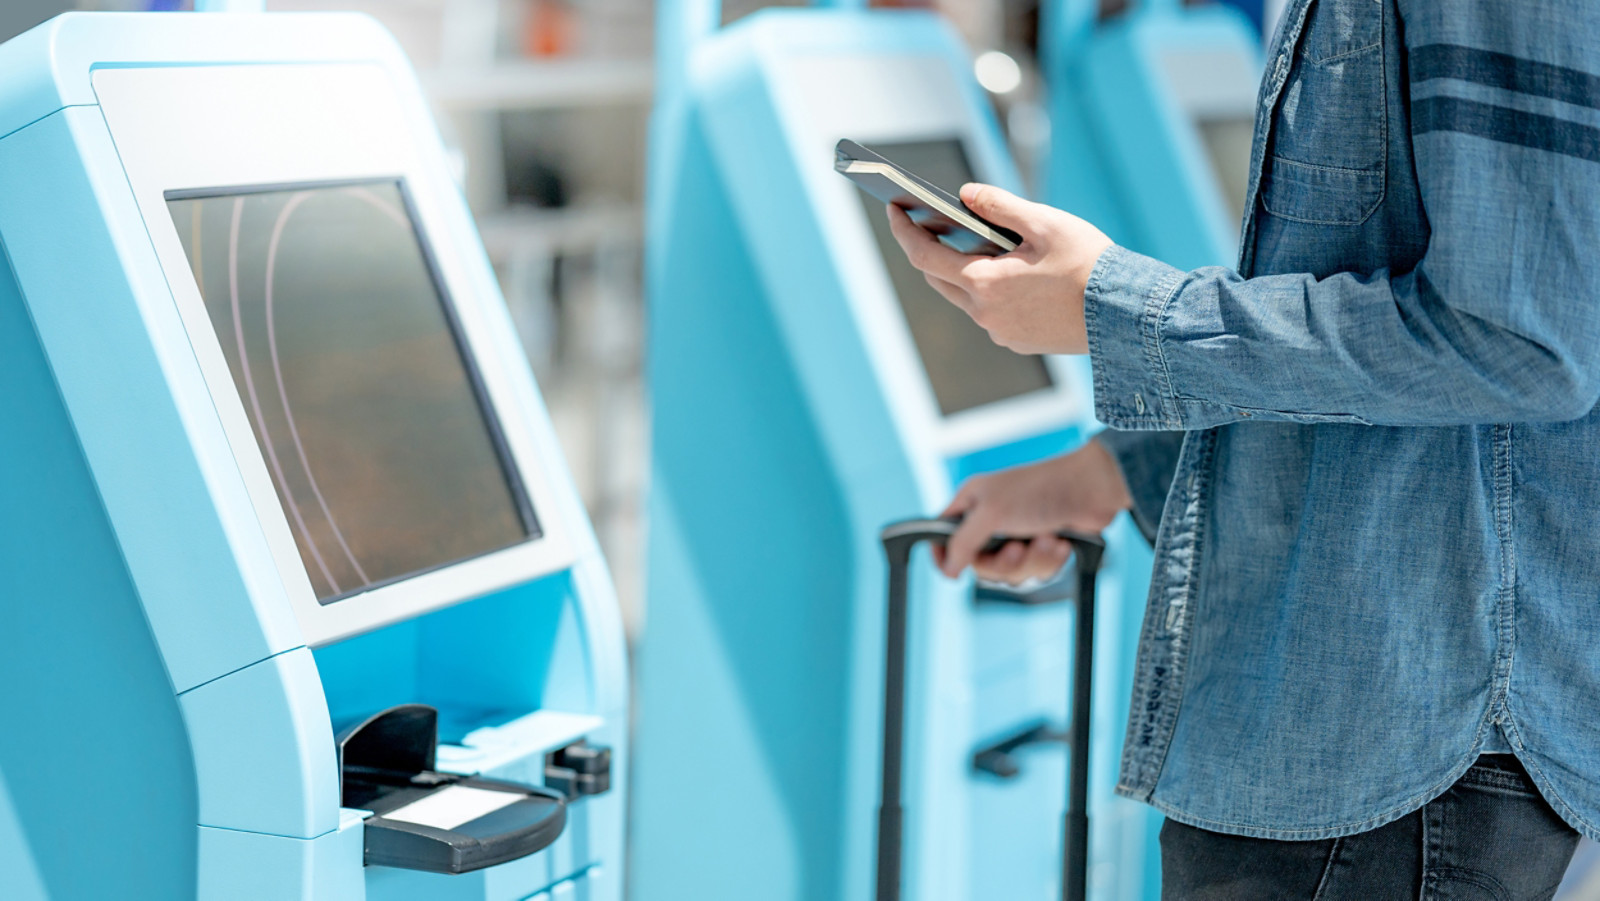 Tourist holding passport and smartphone using self check-in kiosk in airport terminal